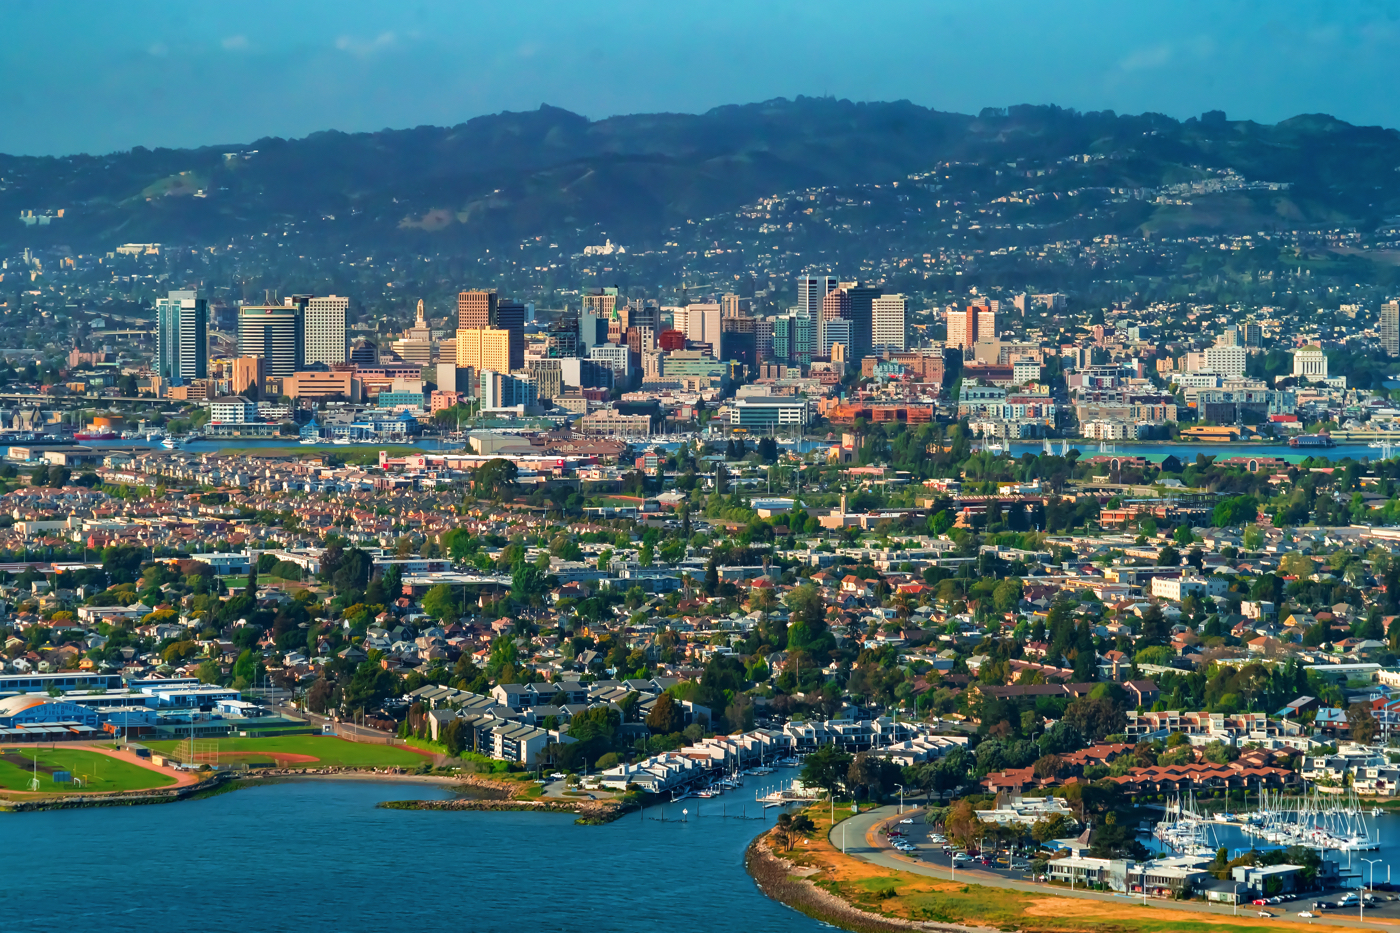 18 Awesome Things To Do in Oakland, California